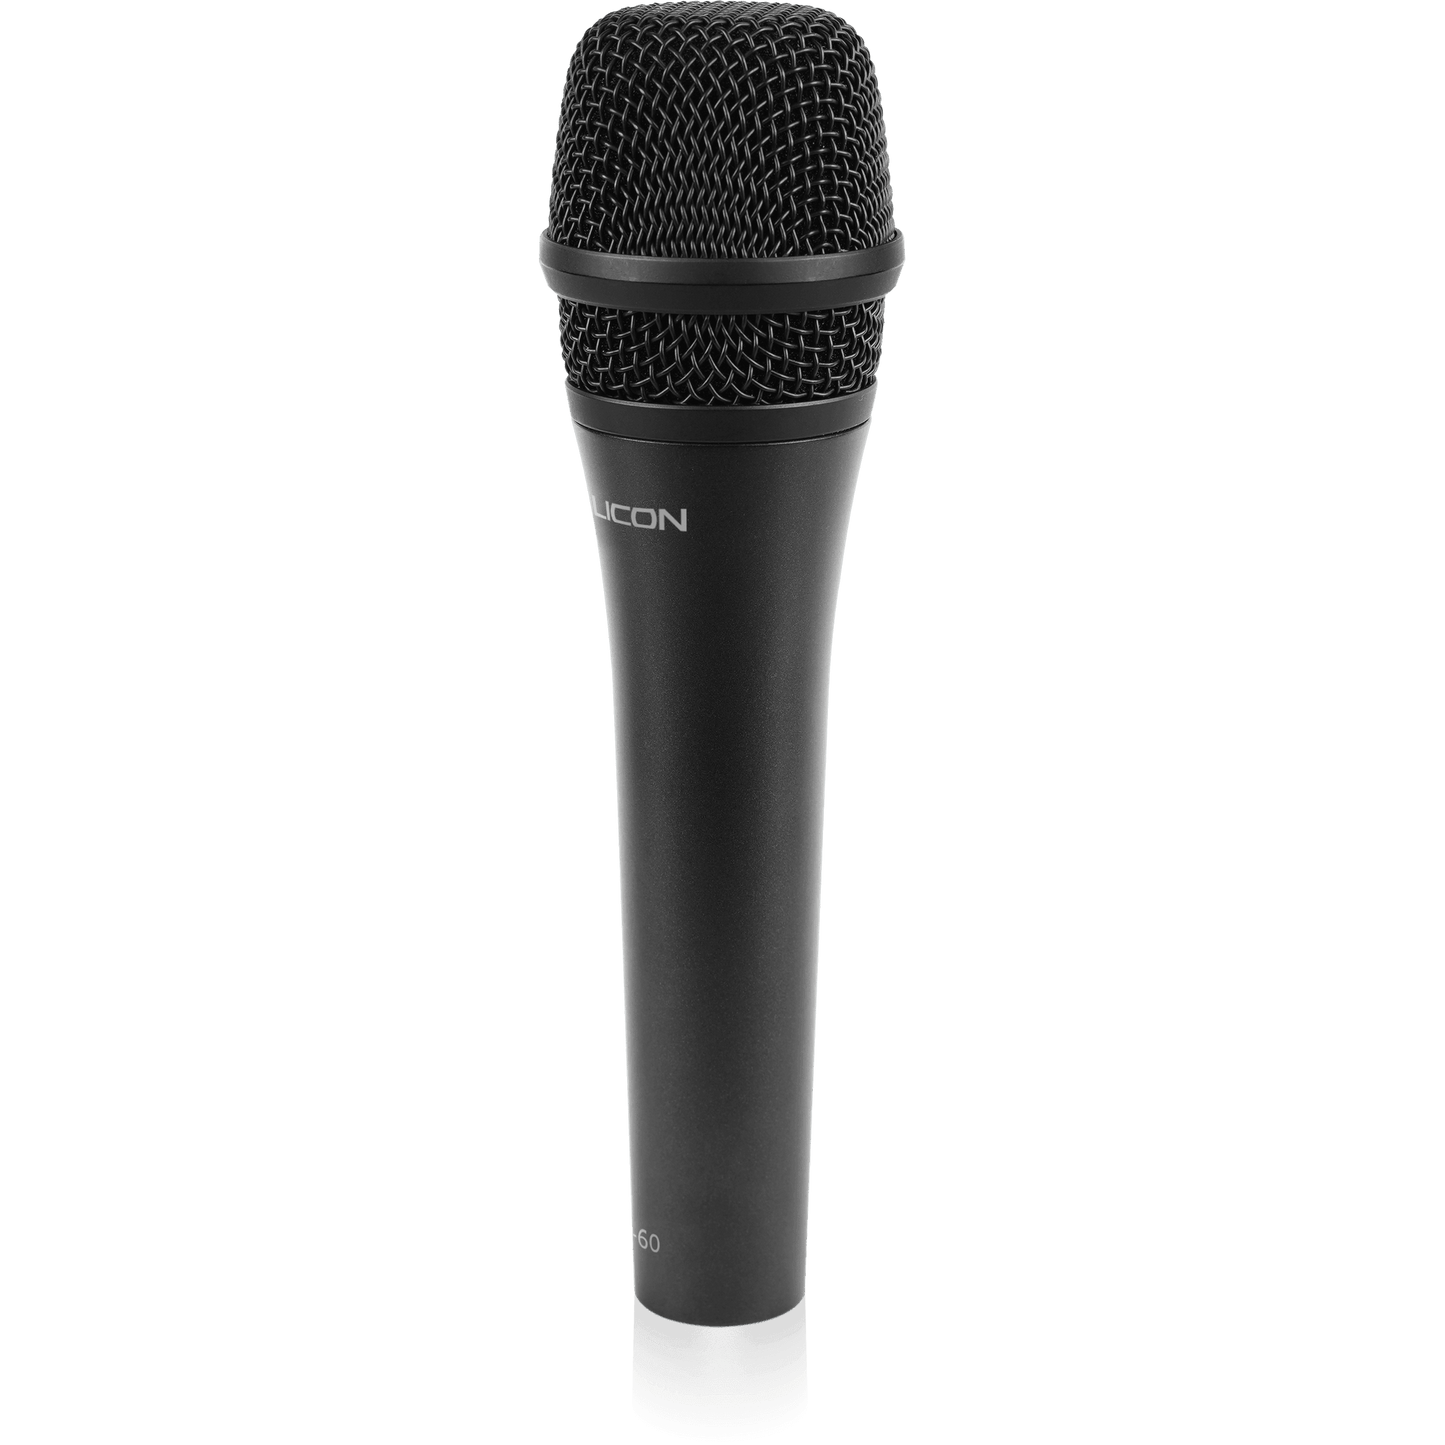 TC Helicon MP-60 Pro-Quality Handheld Microphone for Live Vocals